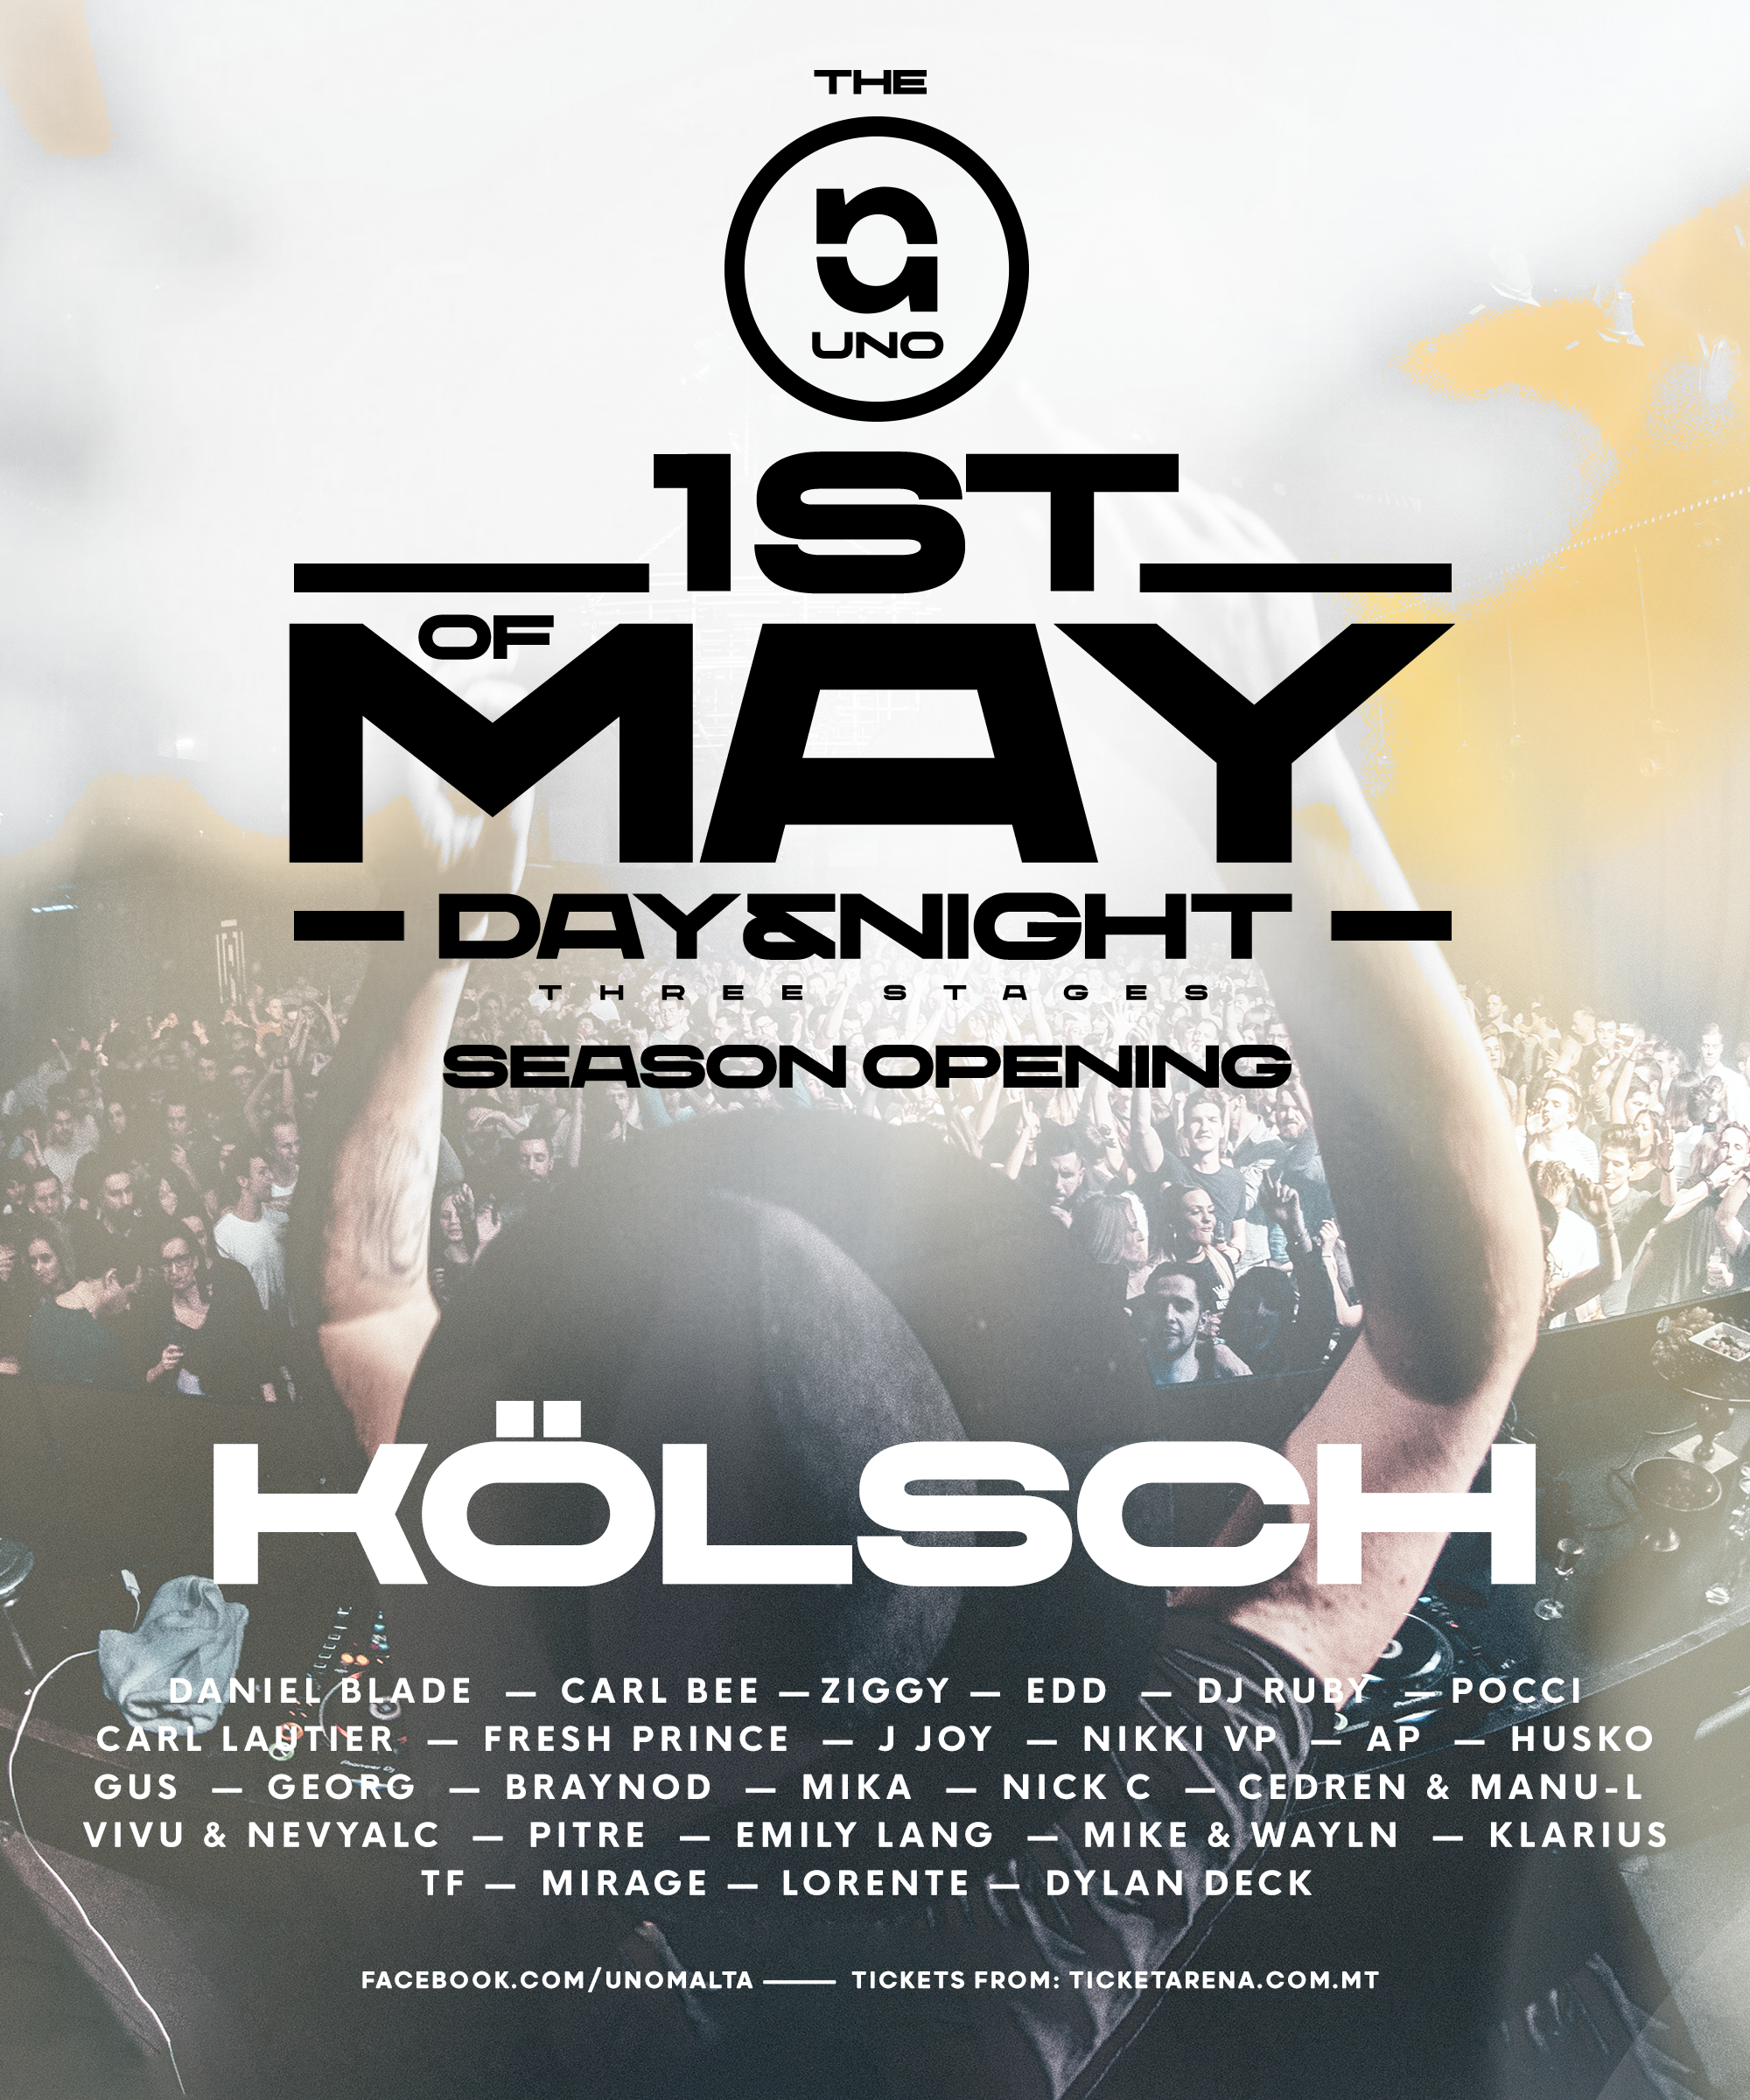 1st of May - Day & Night with KÖLSCH at Uno - フライヤー表